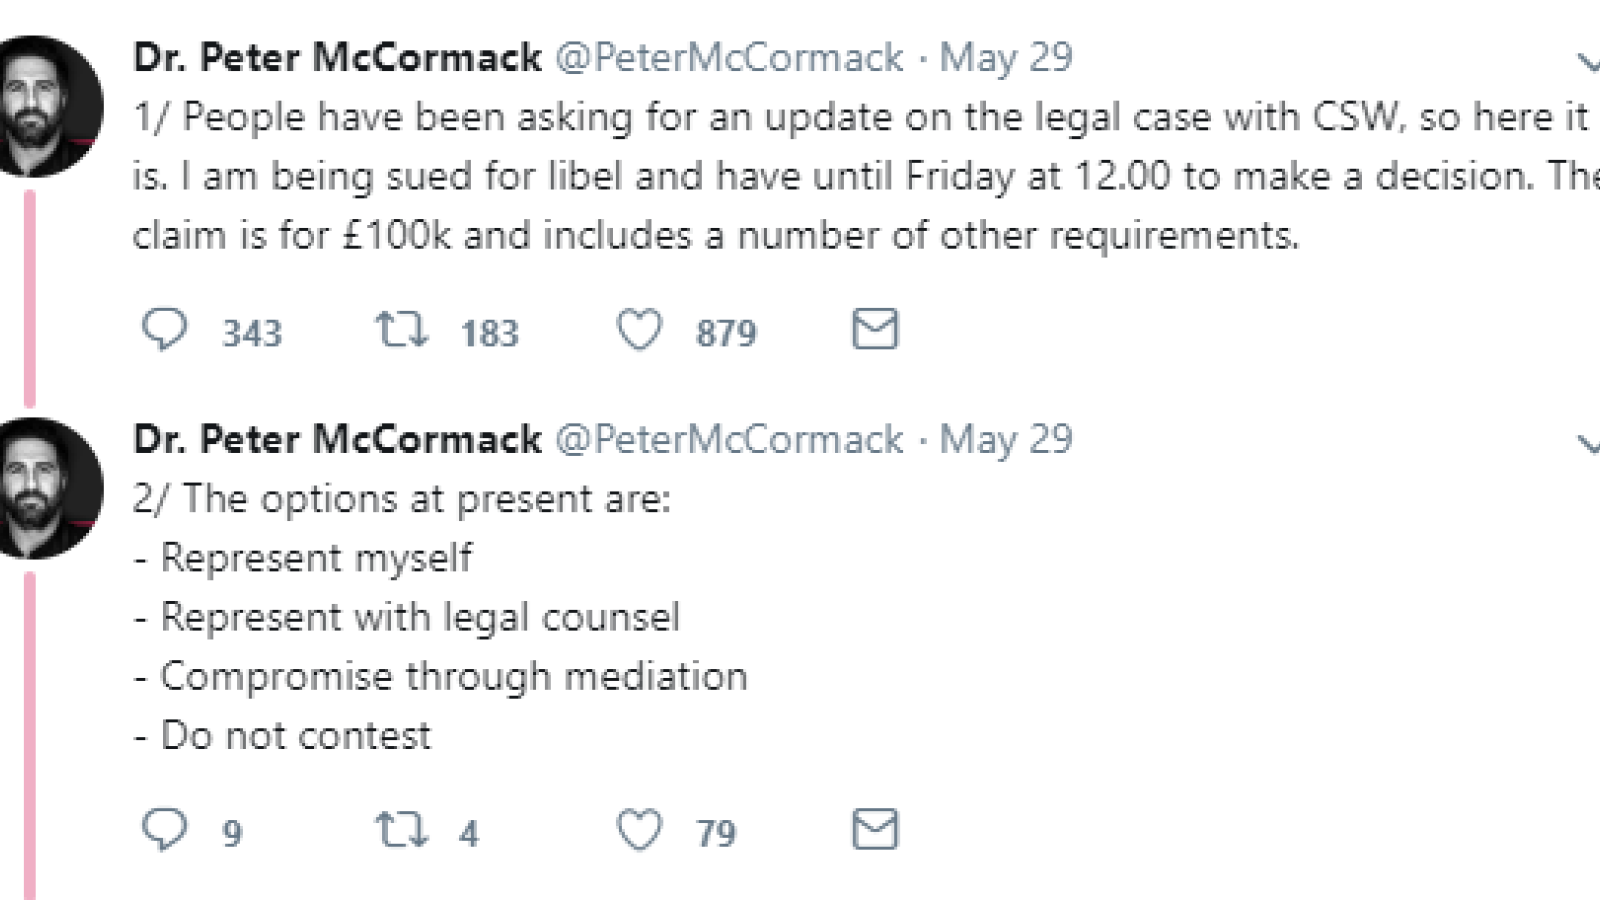 Craig Wright’s Legal Action Against Peter McCormack Might Cost Podcaster over £700,000